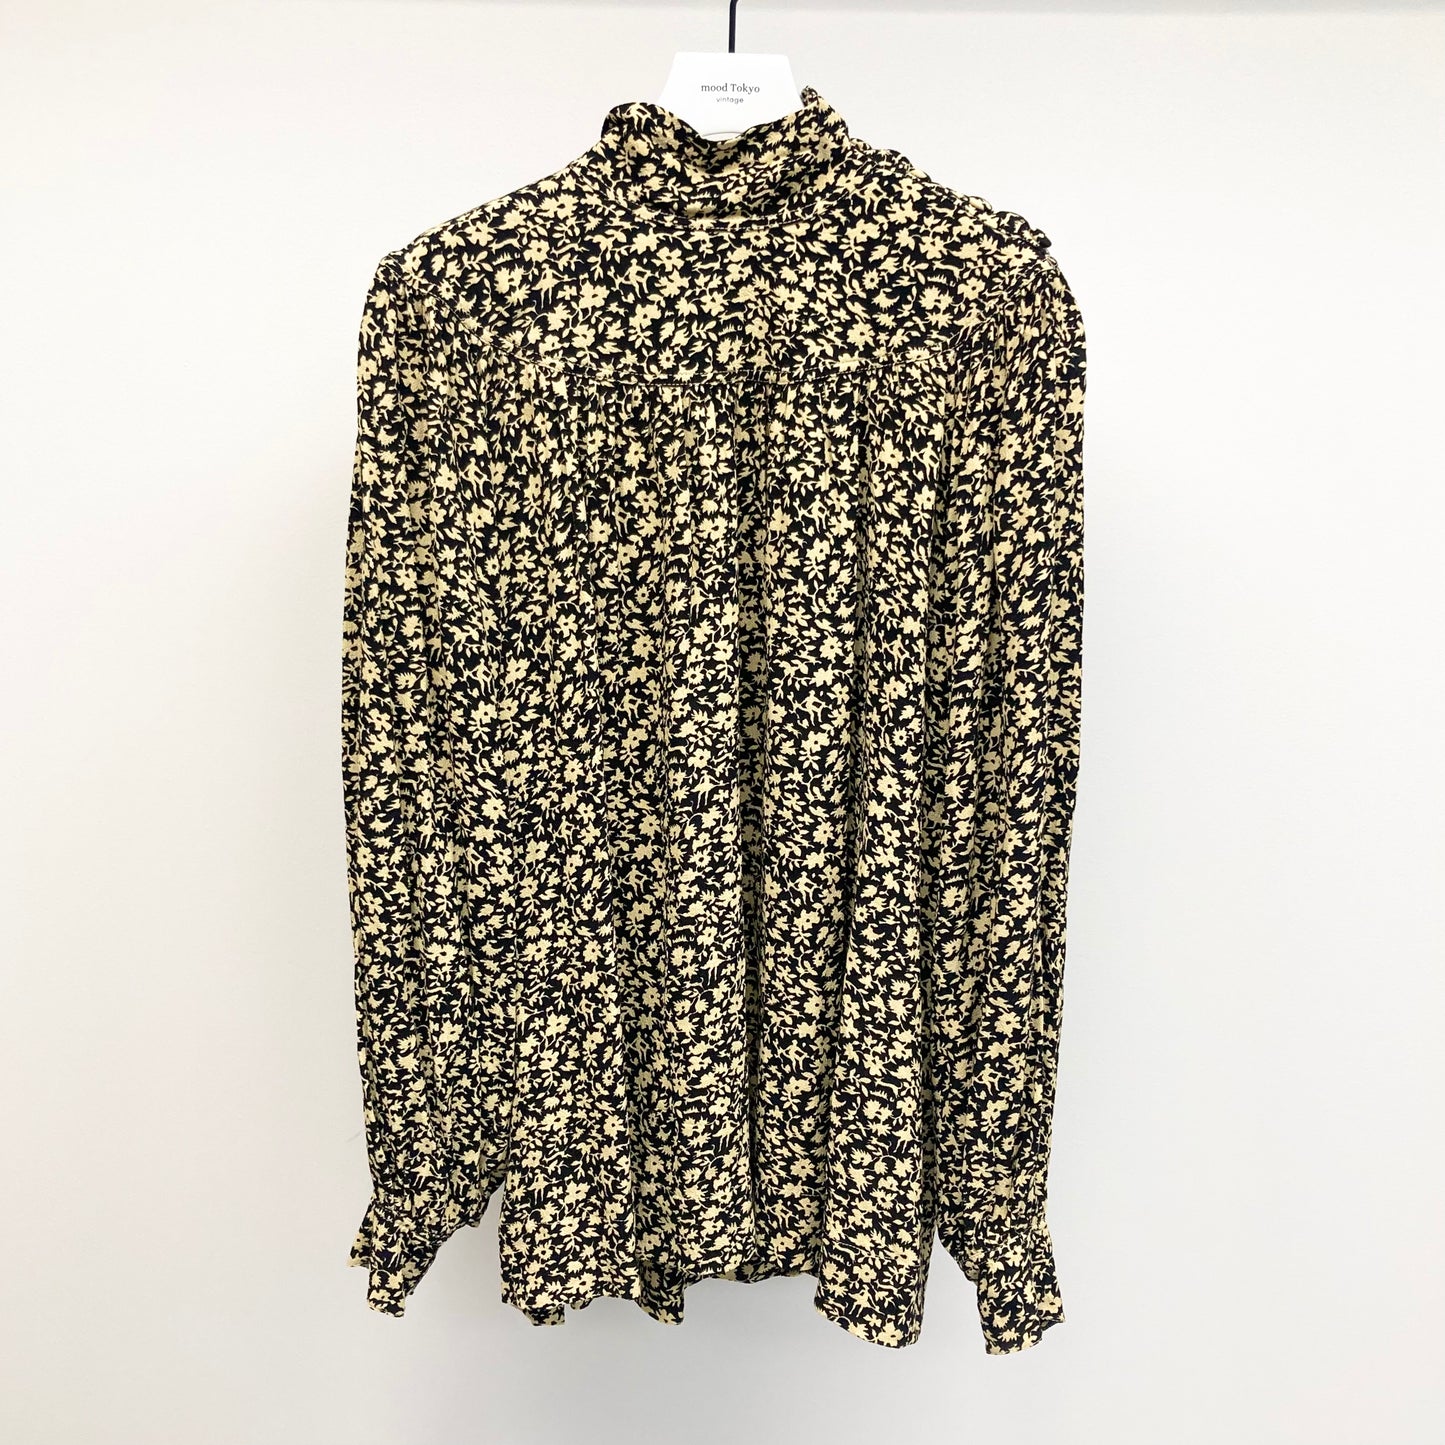 Pre-Fall2016 Celine by Phoebe Philo floral-printed shirt